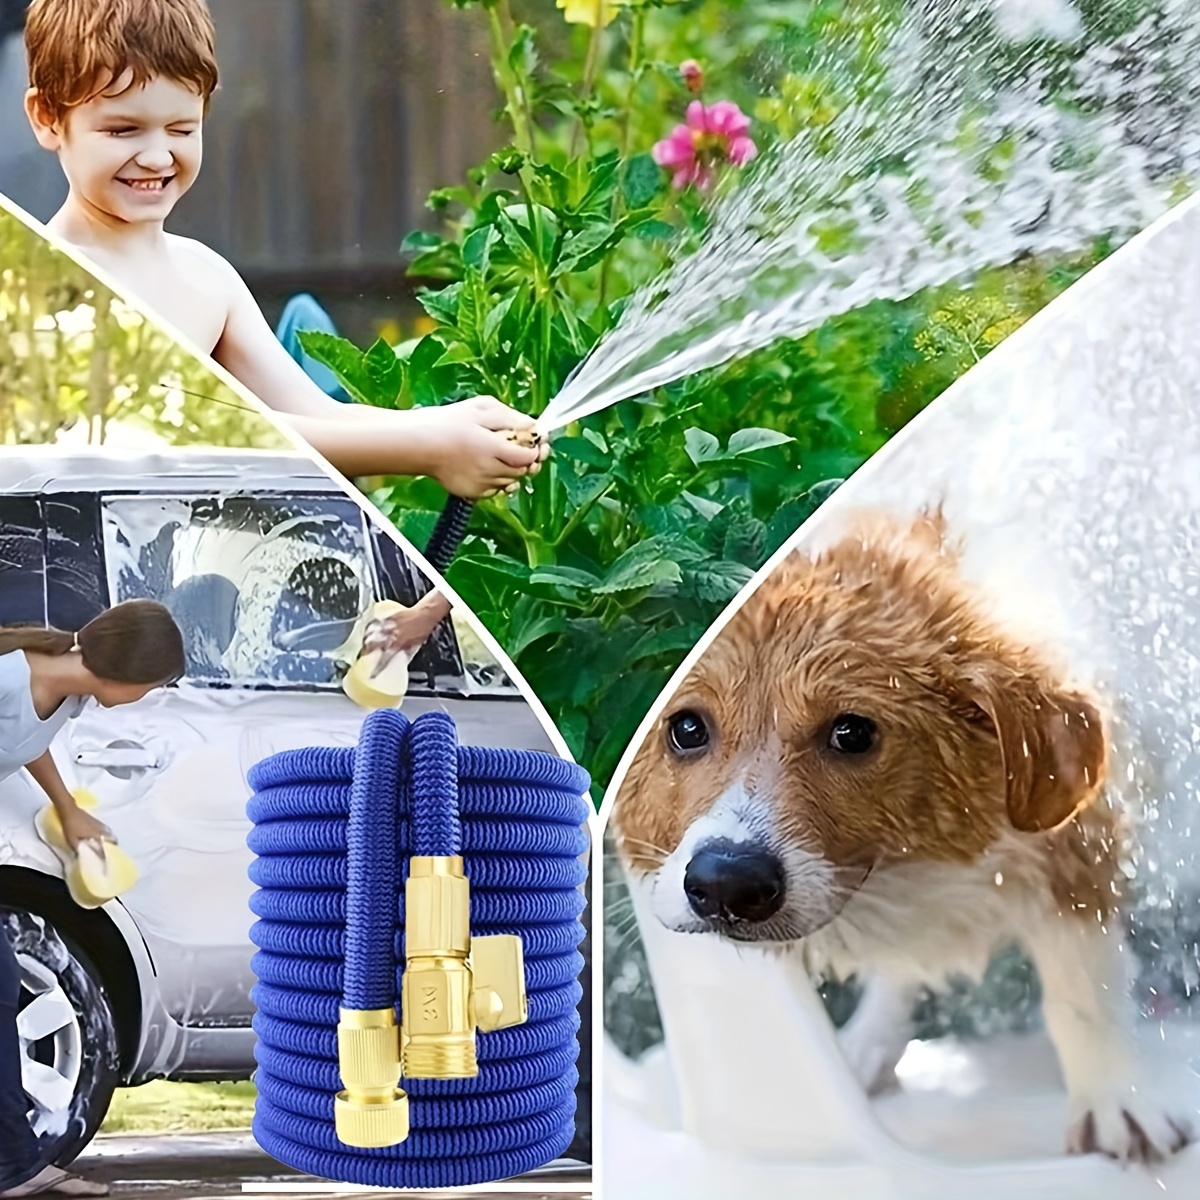 Buy Magic Hose Water Pipe for Garden & Car wash - 100ft at Lowest